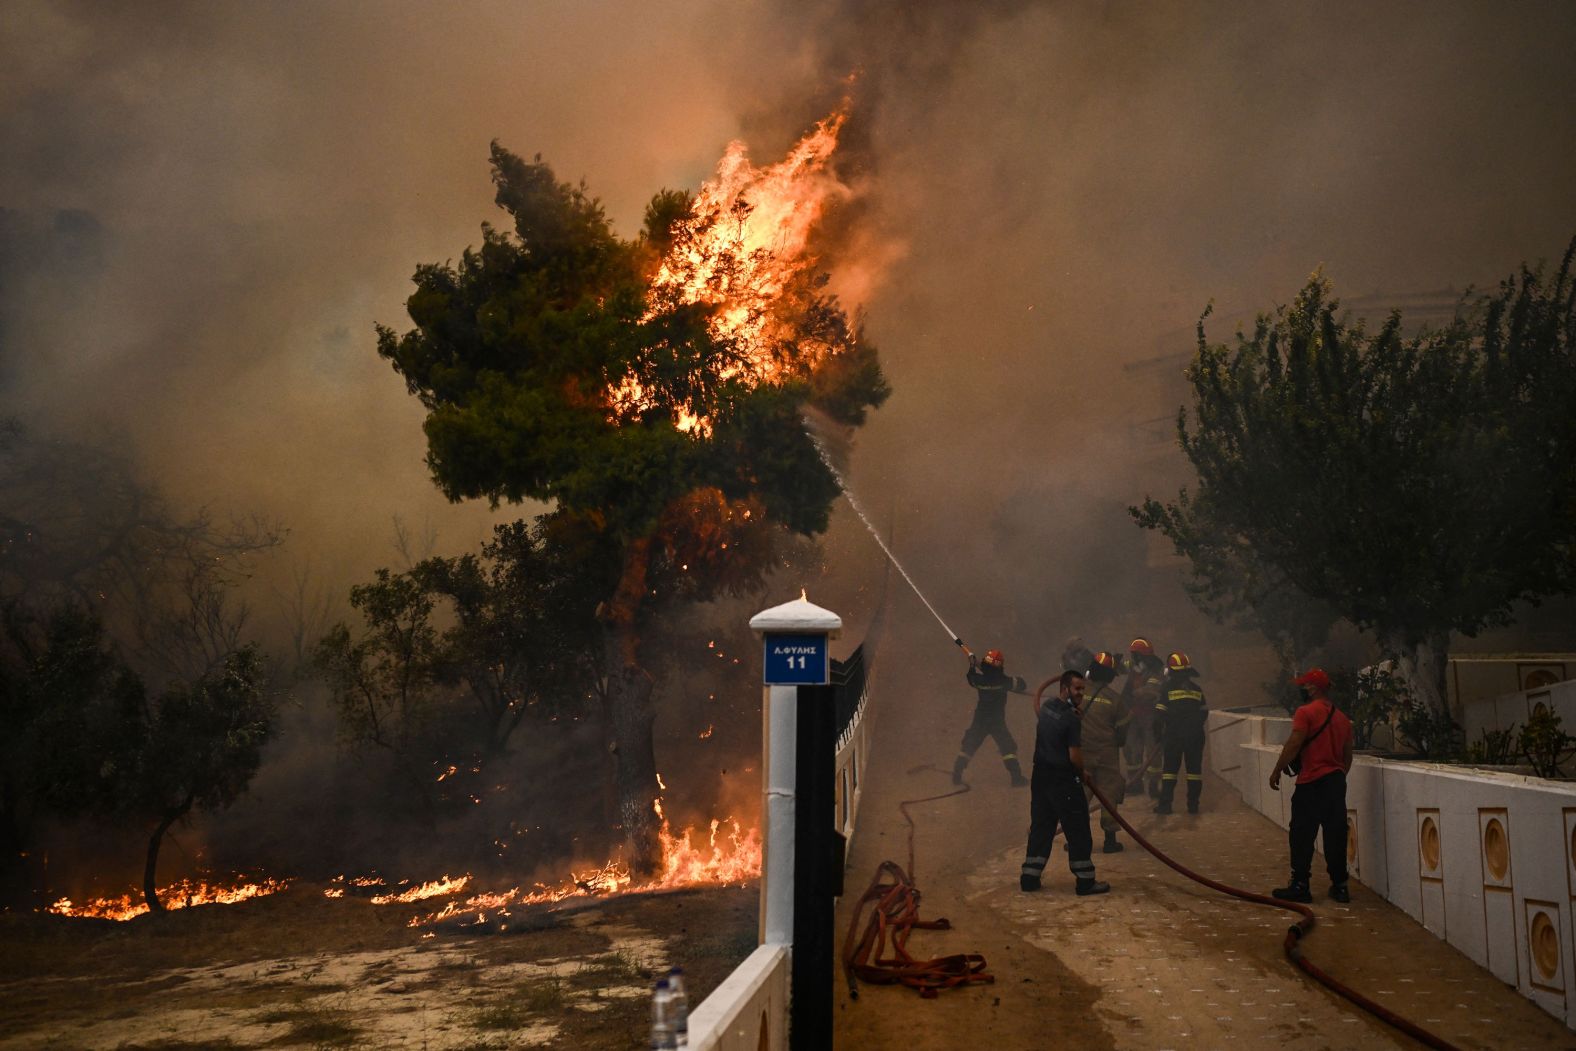 A firefighter sprays water on flames during a wildfire in Chasia on August 22.